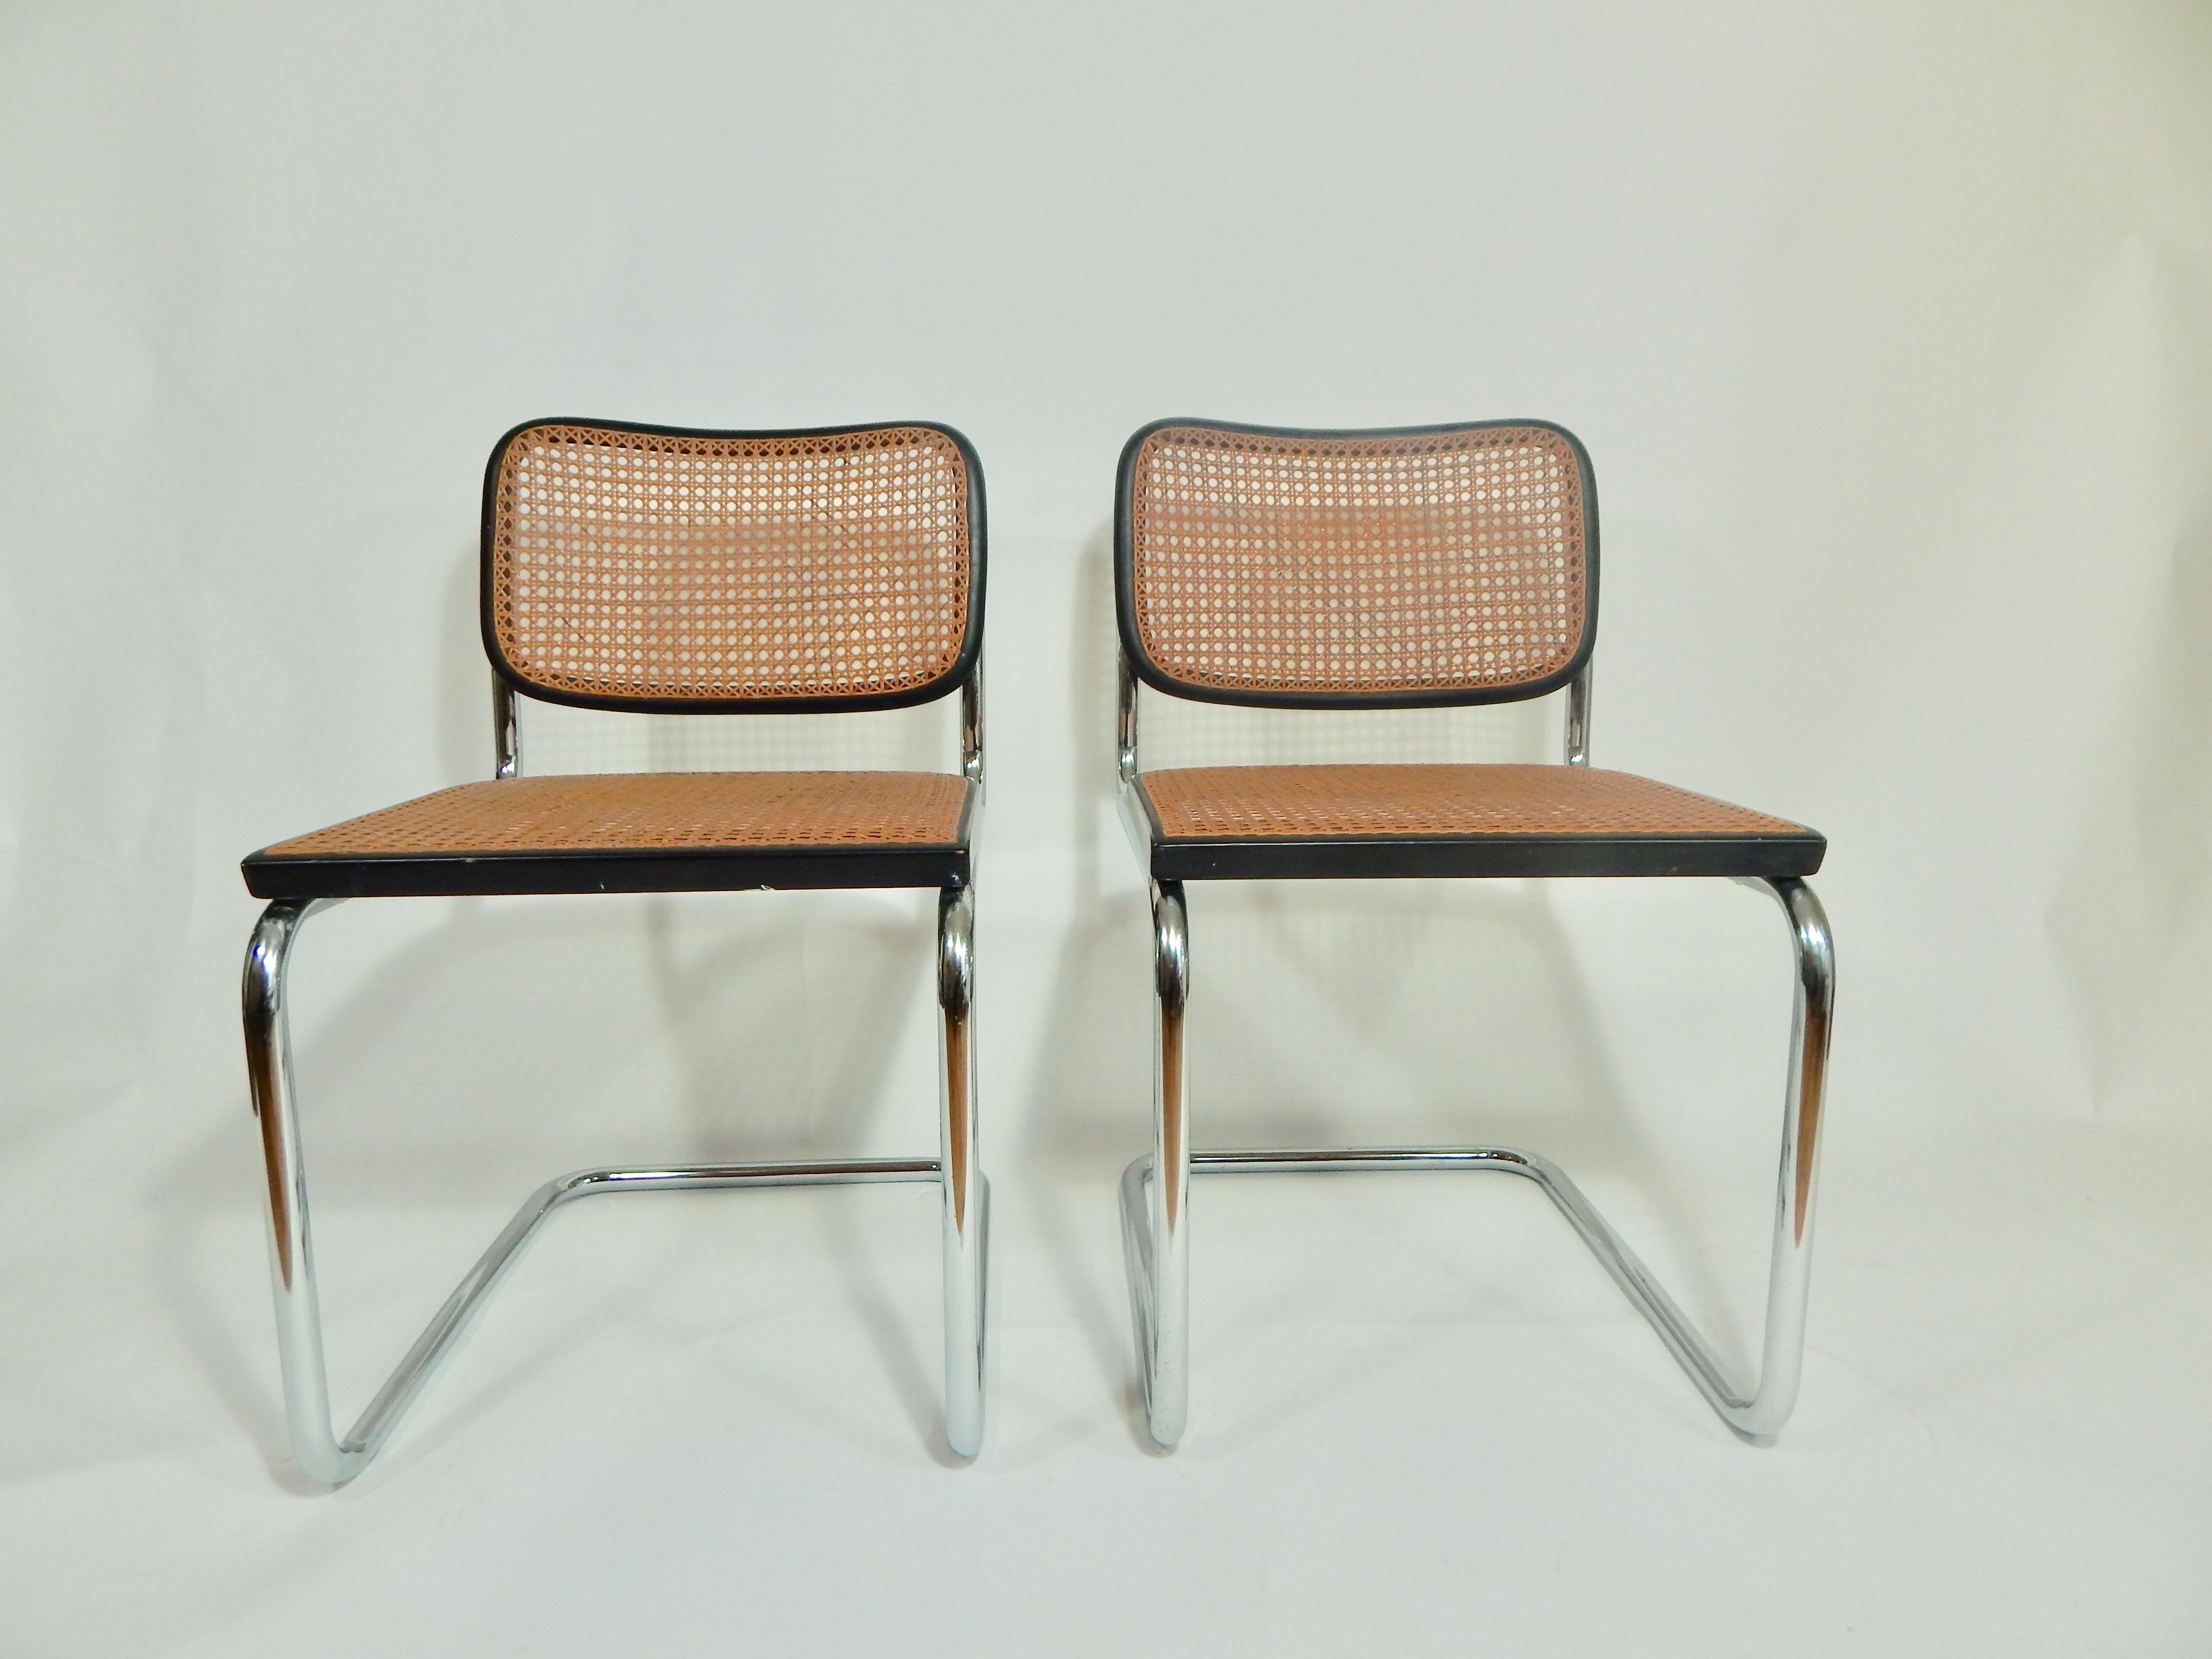 Stunning pair of Midcentury late 1960s Cane Cesca sidechairs originally designed by Marcel Breuer in 1928. All Hand Caning (see photos) and both chairs still retain markings of both Knoll and Gavina. Chrome tubular frames. Chairs are an early